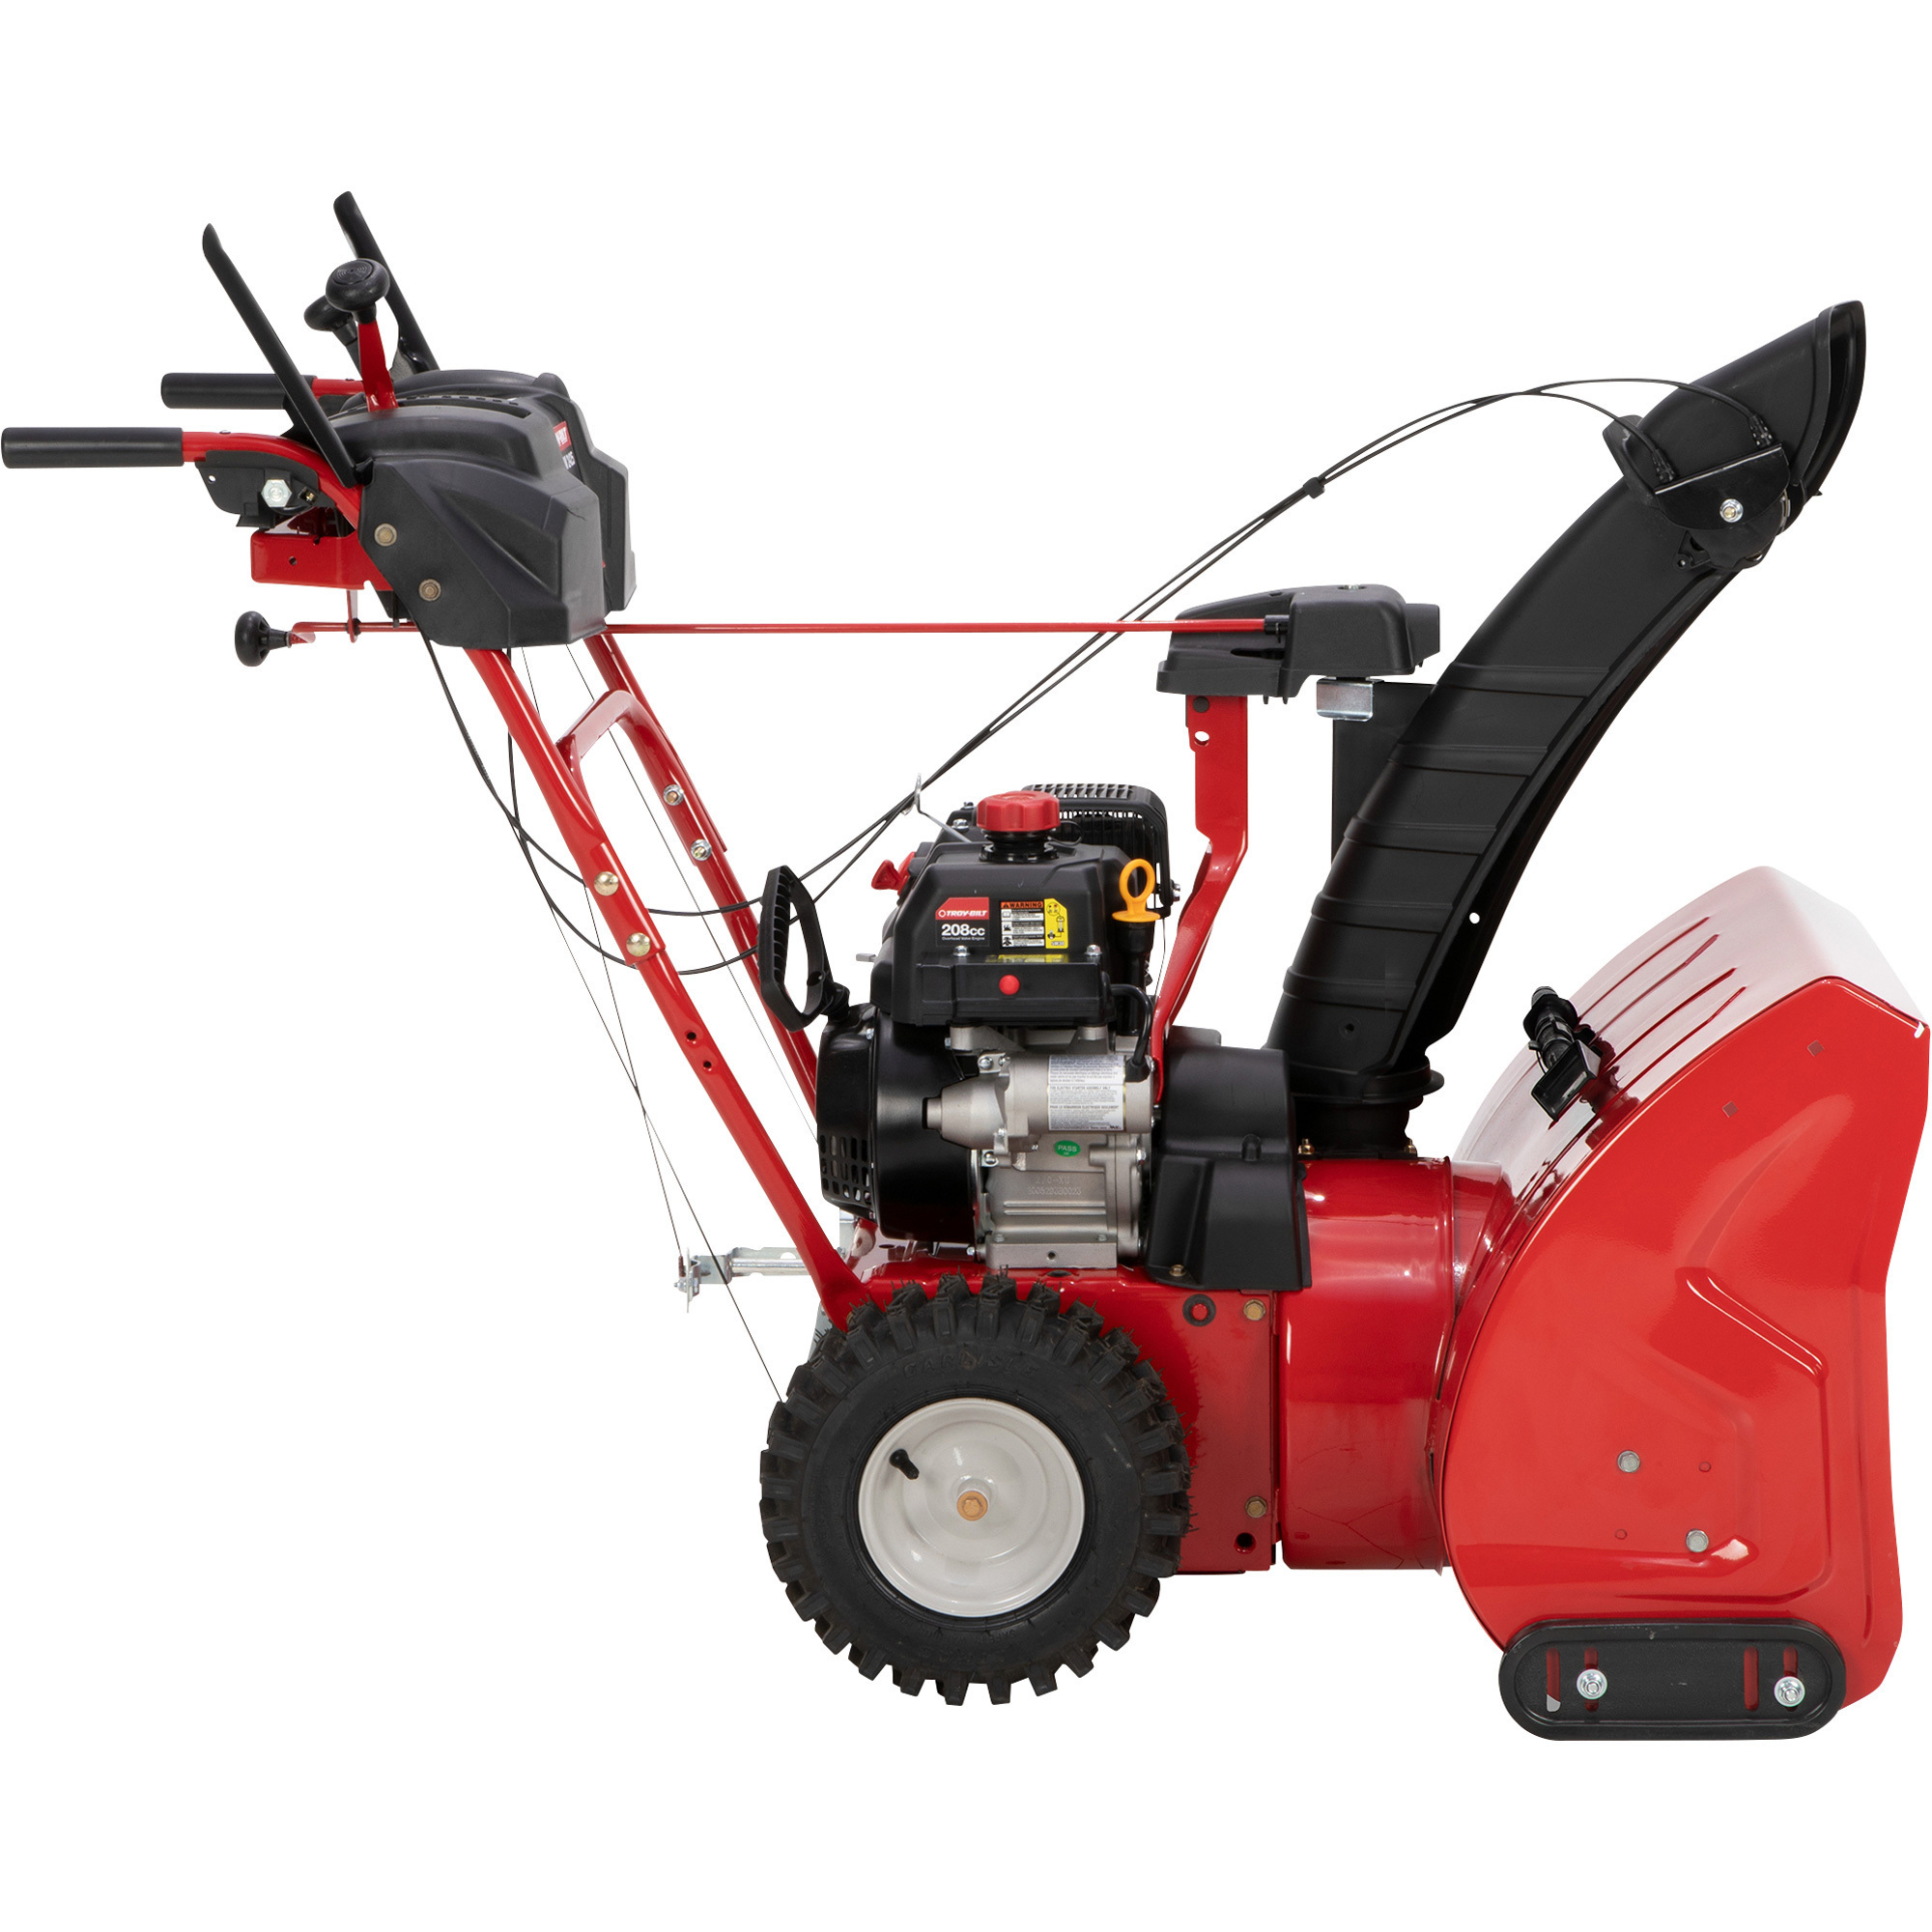 Troy-Bilt Storm 2425 2-Stage Self-Propelled Snow Thrower with Electric Start, 24Inch, 208cc, Model 31BS6KM2B66